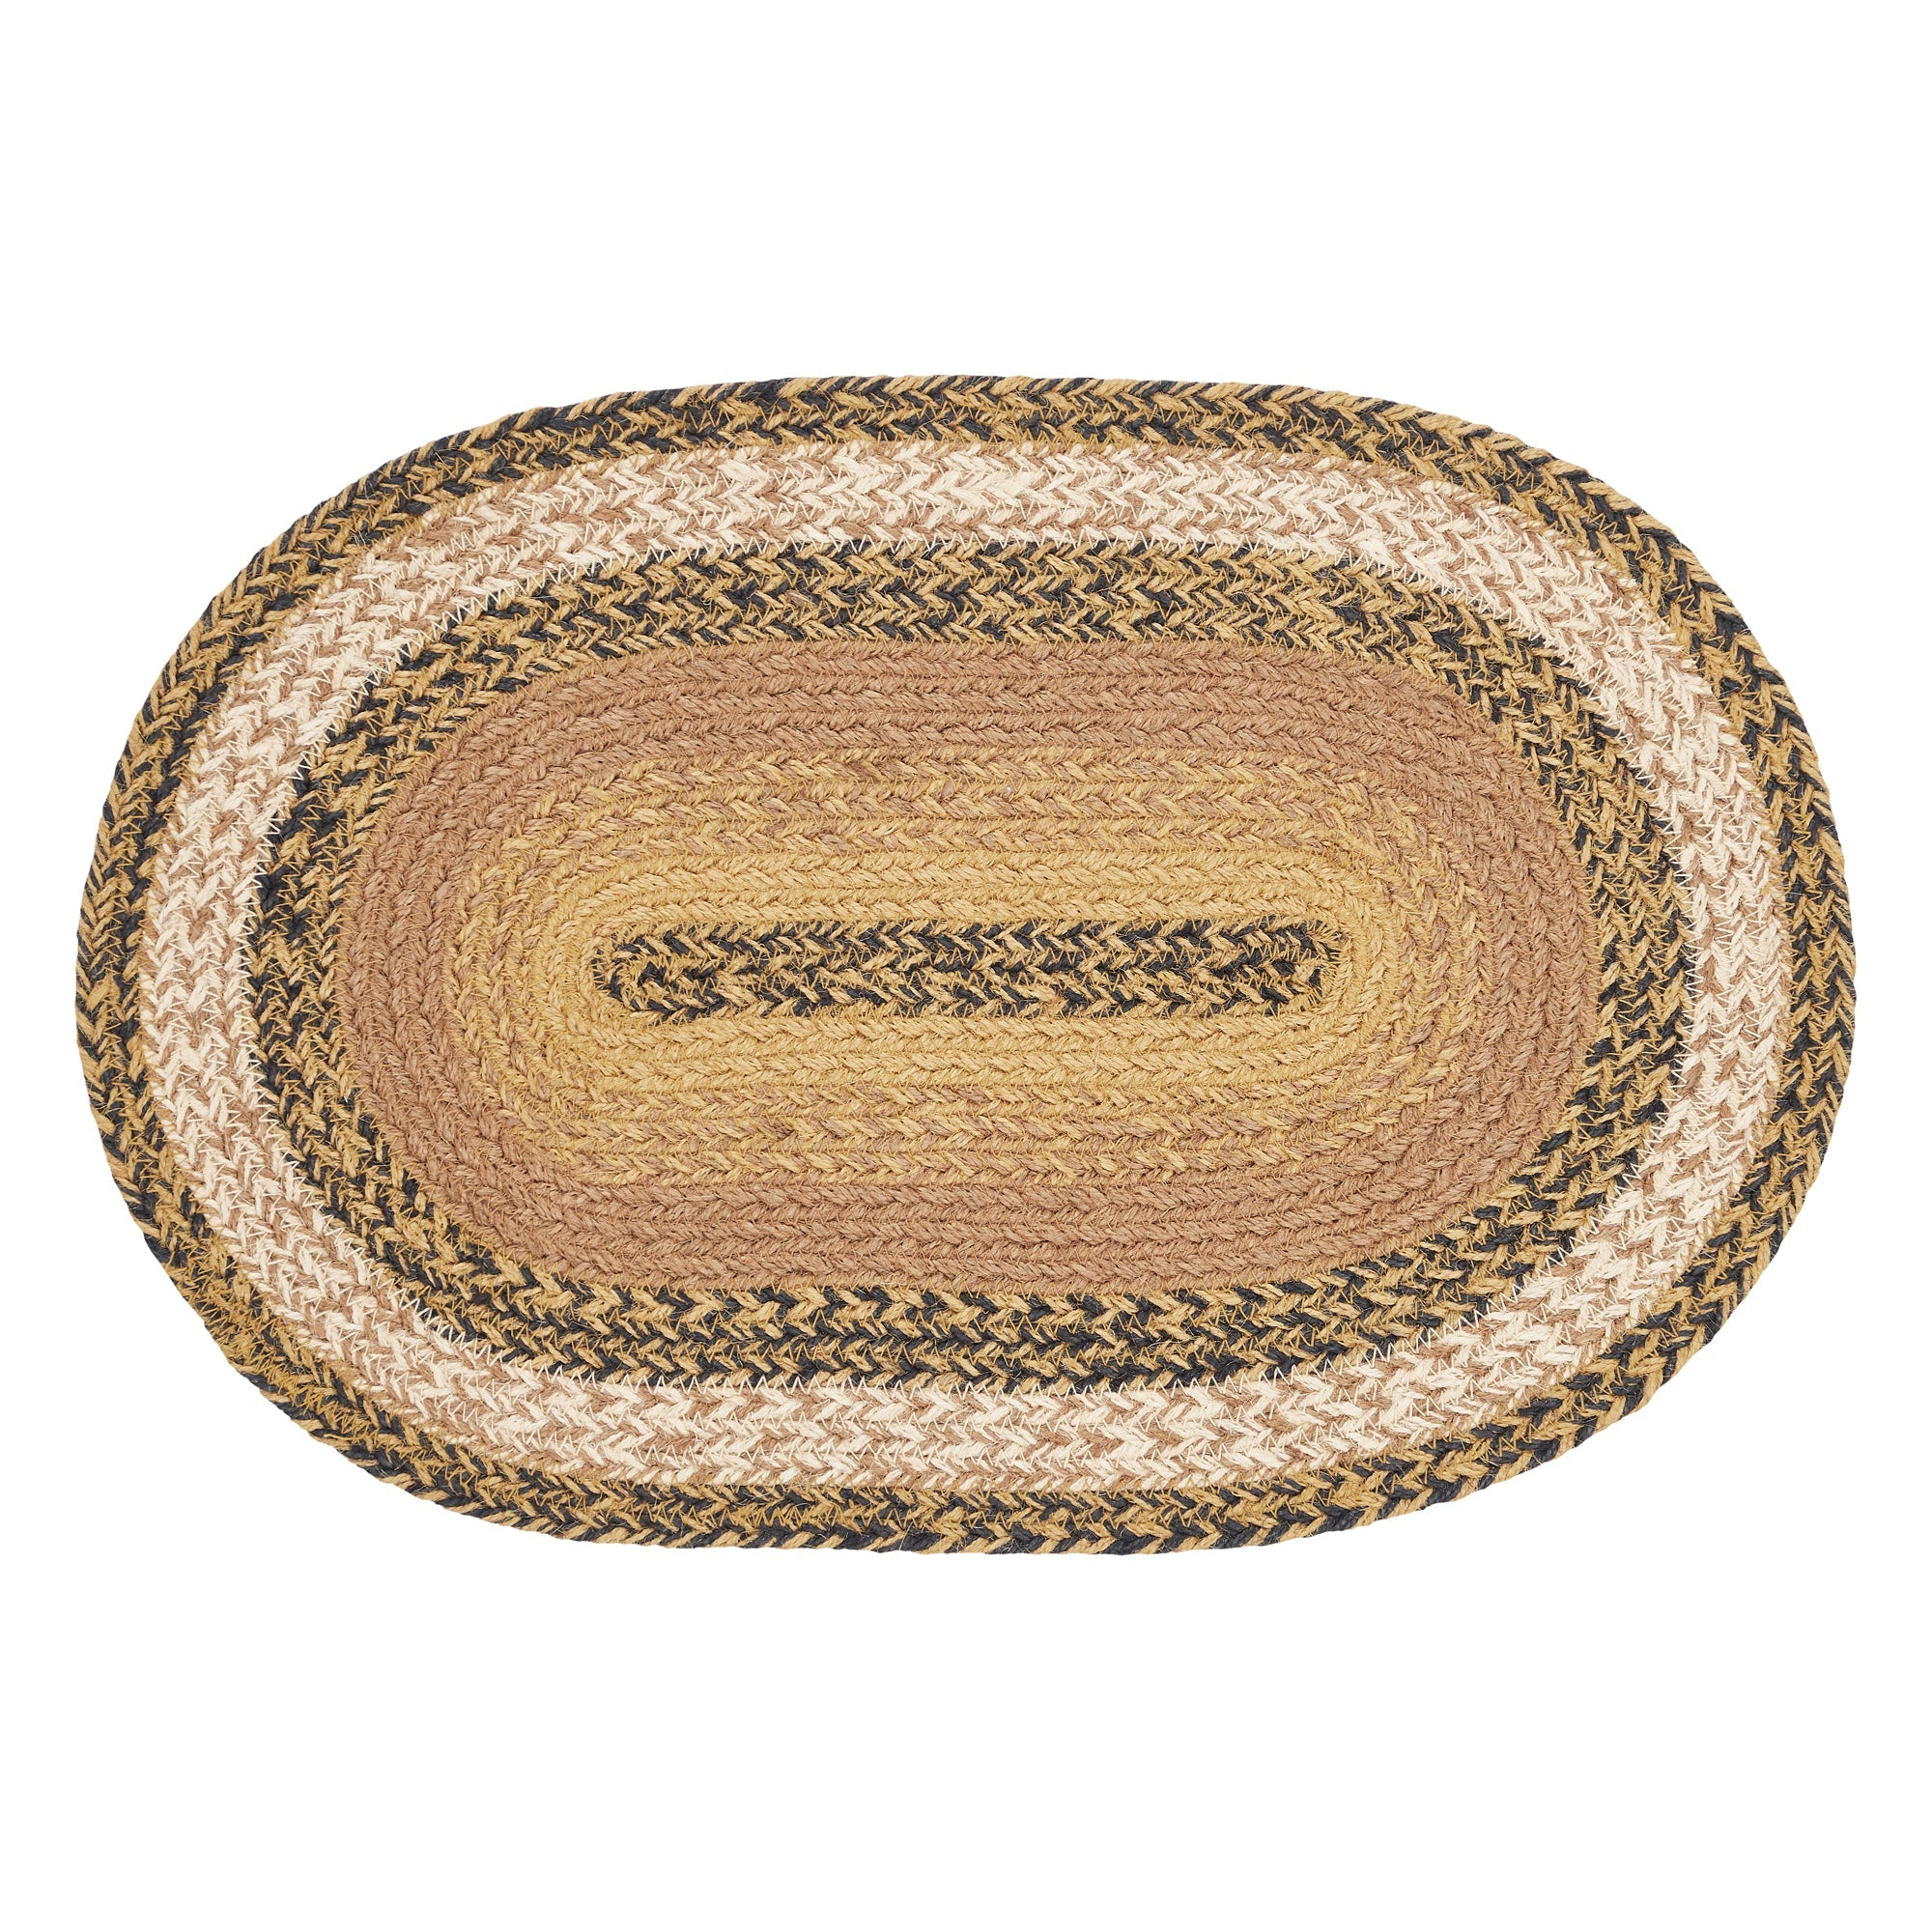 Kettle Grove Jute Braided Oval Placemat 12"x18" VHC Brands